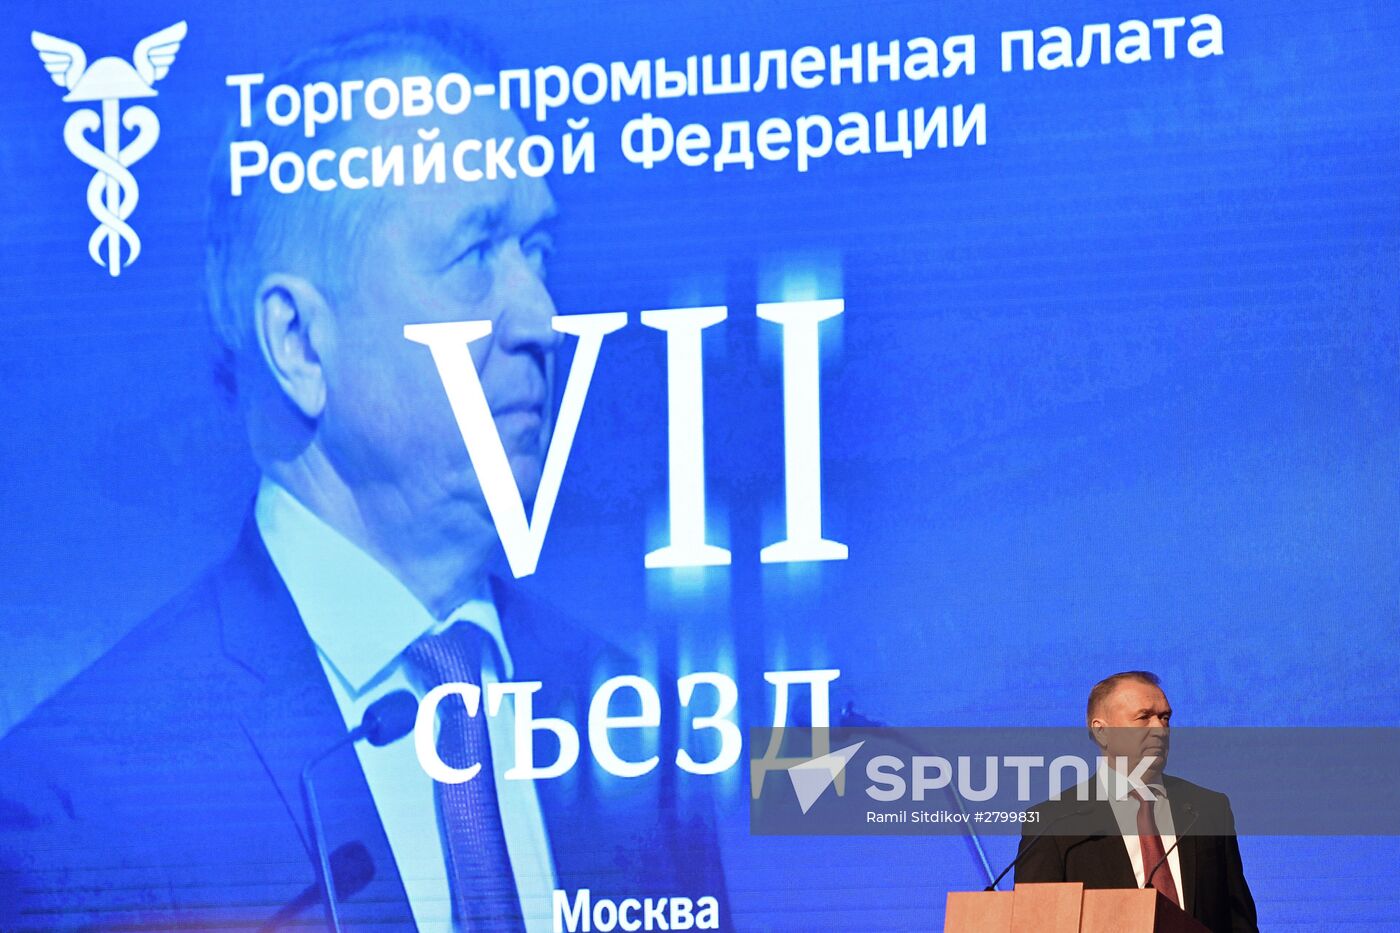 7th Congress of the Russian Chamber of Commerce and Industry